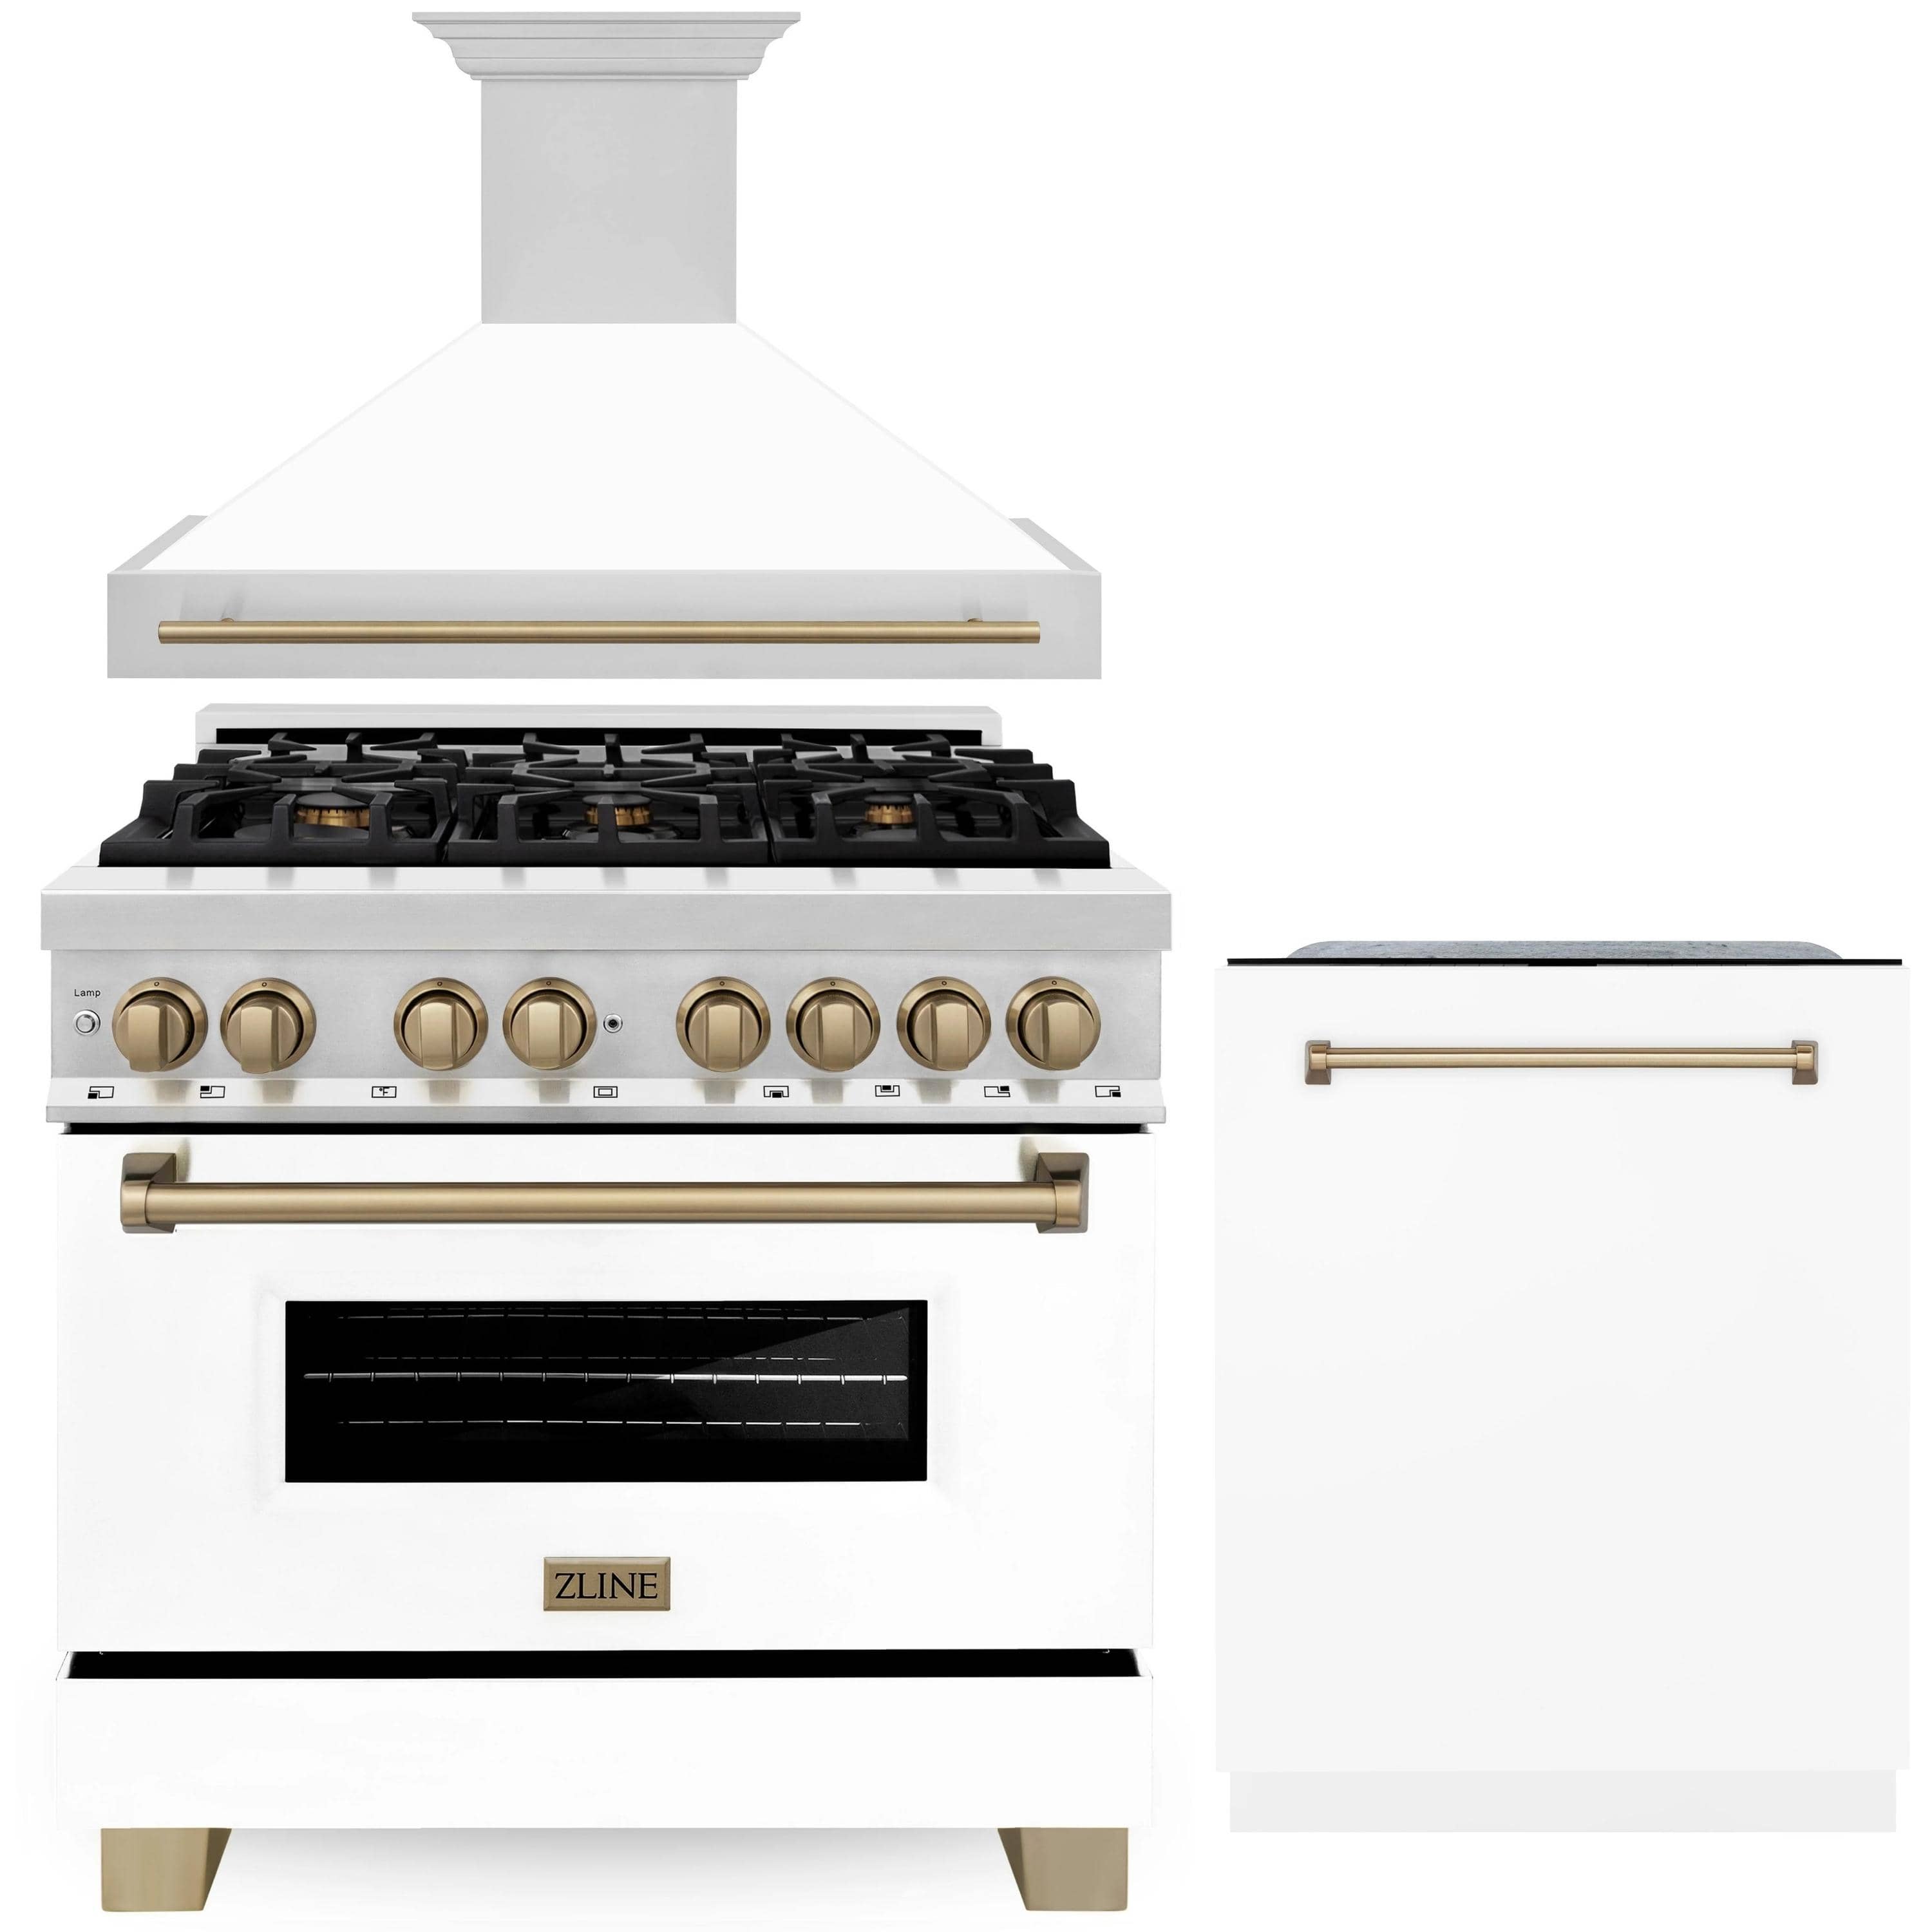 ZLINE Autograph Edition 3-Piece Appliance Package - 36-Inch Dual Fuel Range, Wall Mounted Range Hood, & 24-Inch Tall Tub Dishwasher in Stainless Steel and White Door with Champagne Bronze Trim (3AKP-RAWMRHDWM36-CB)